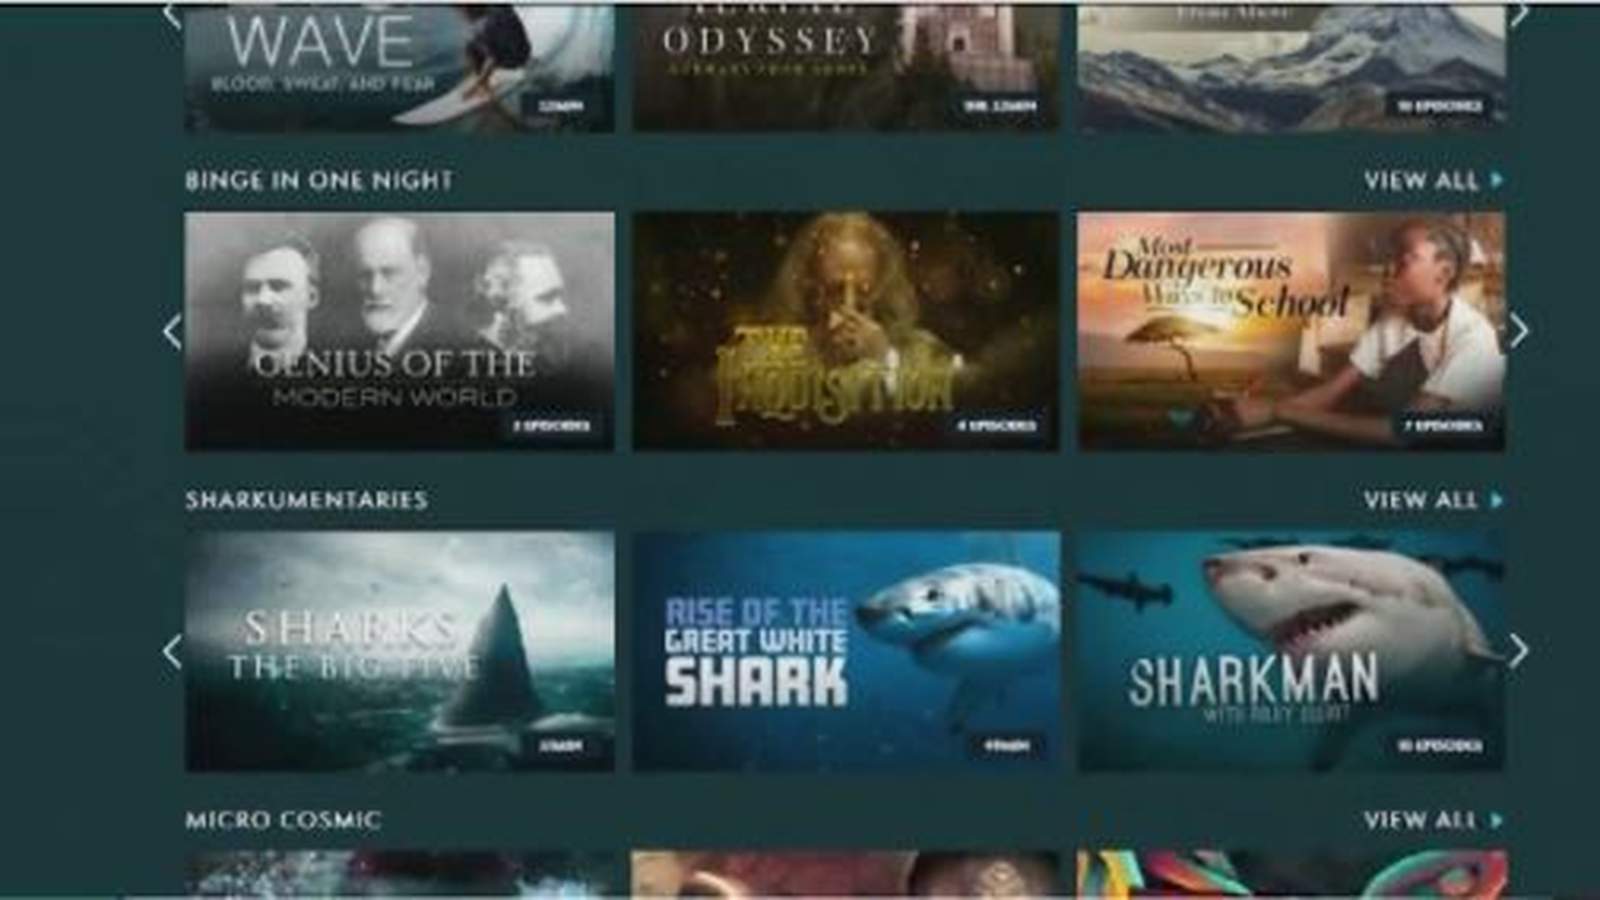 Love binge-watching? Here’s how you can get paid to watch documentaries